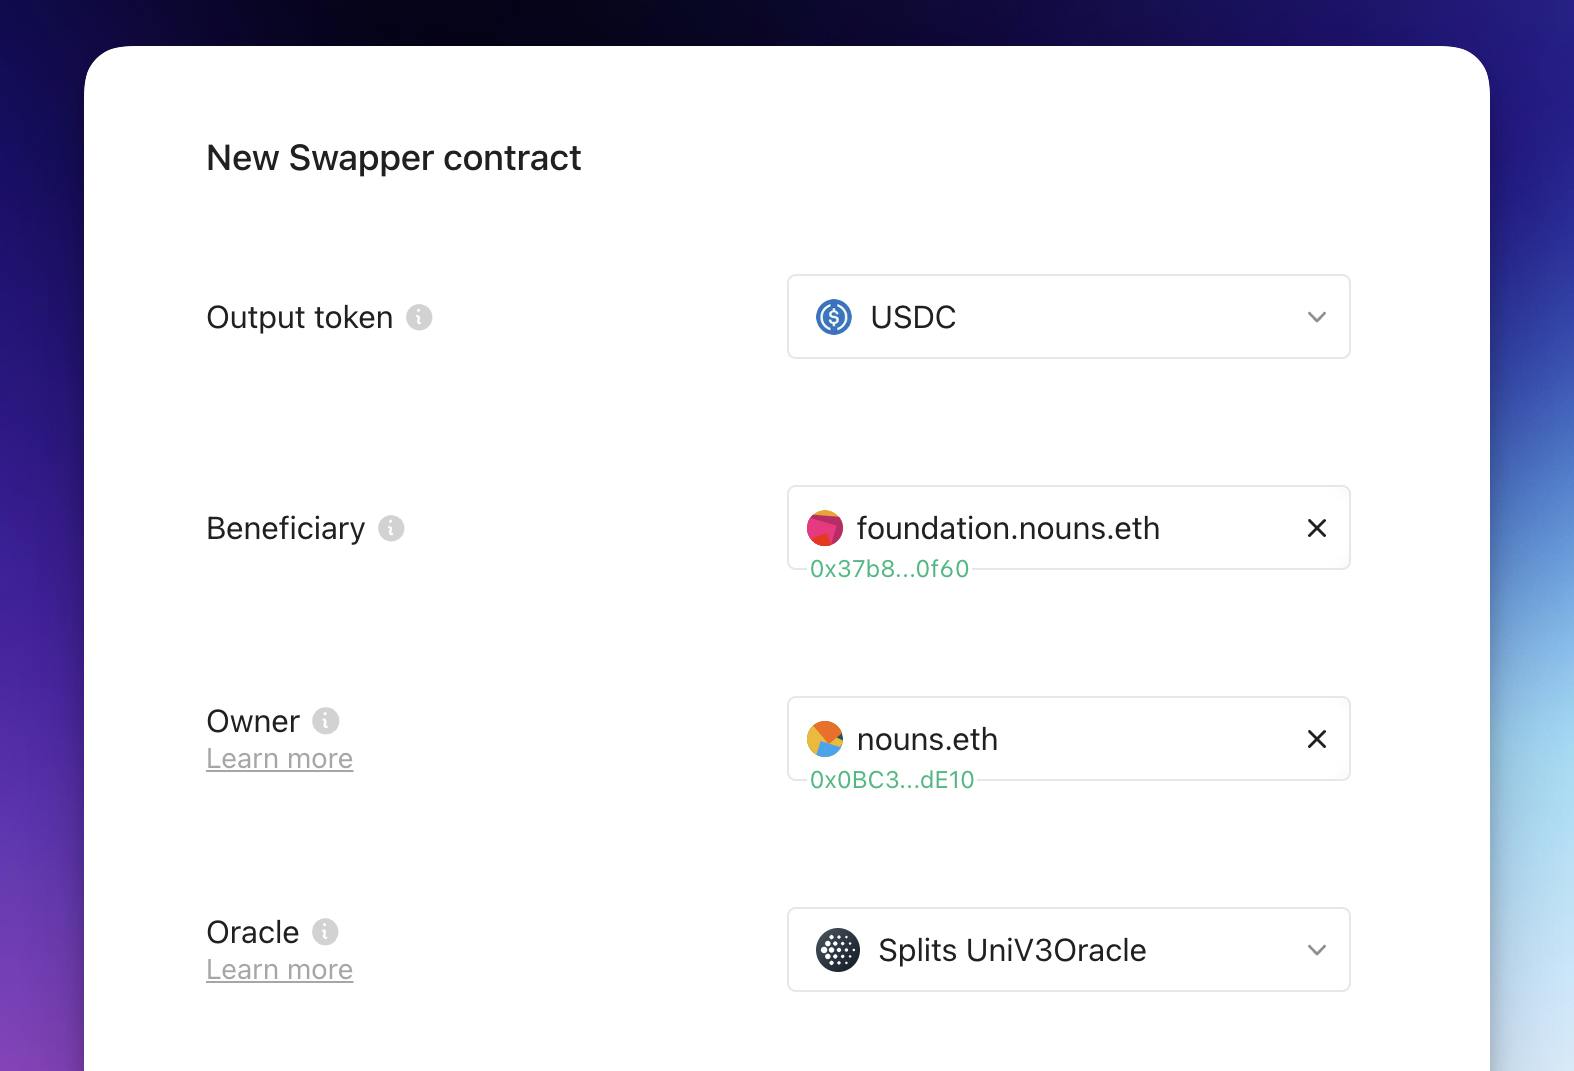 Each Swapper has an output token, a beneficiary, an (optional) owner, and an oracle